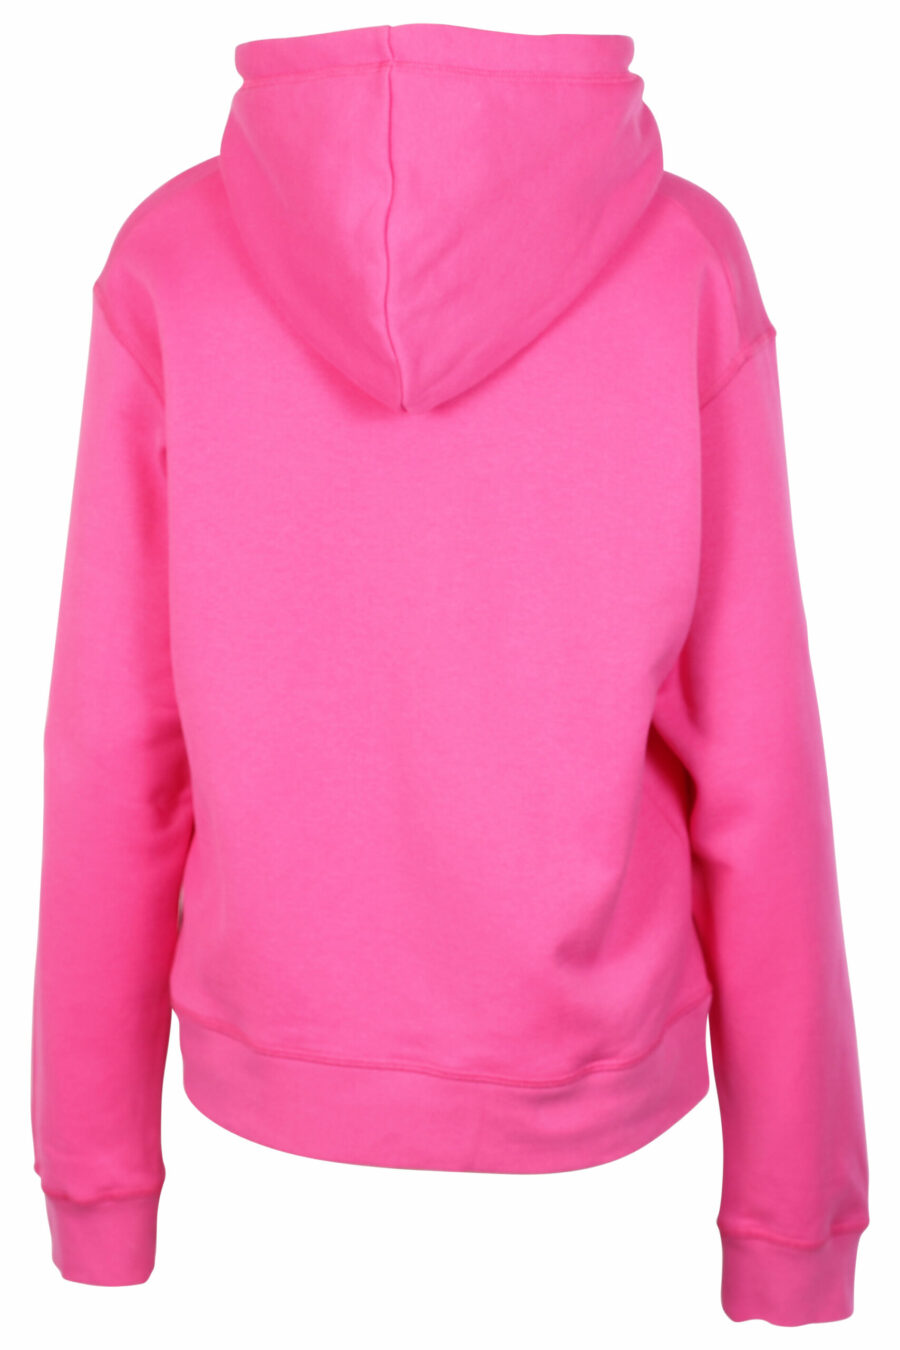 Fuchsia hooded sweatshirt with central "Icon" minilogue - 8054148005221 3 scaled